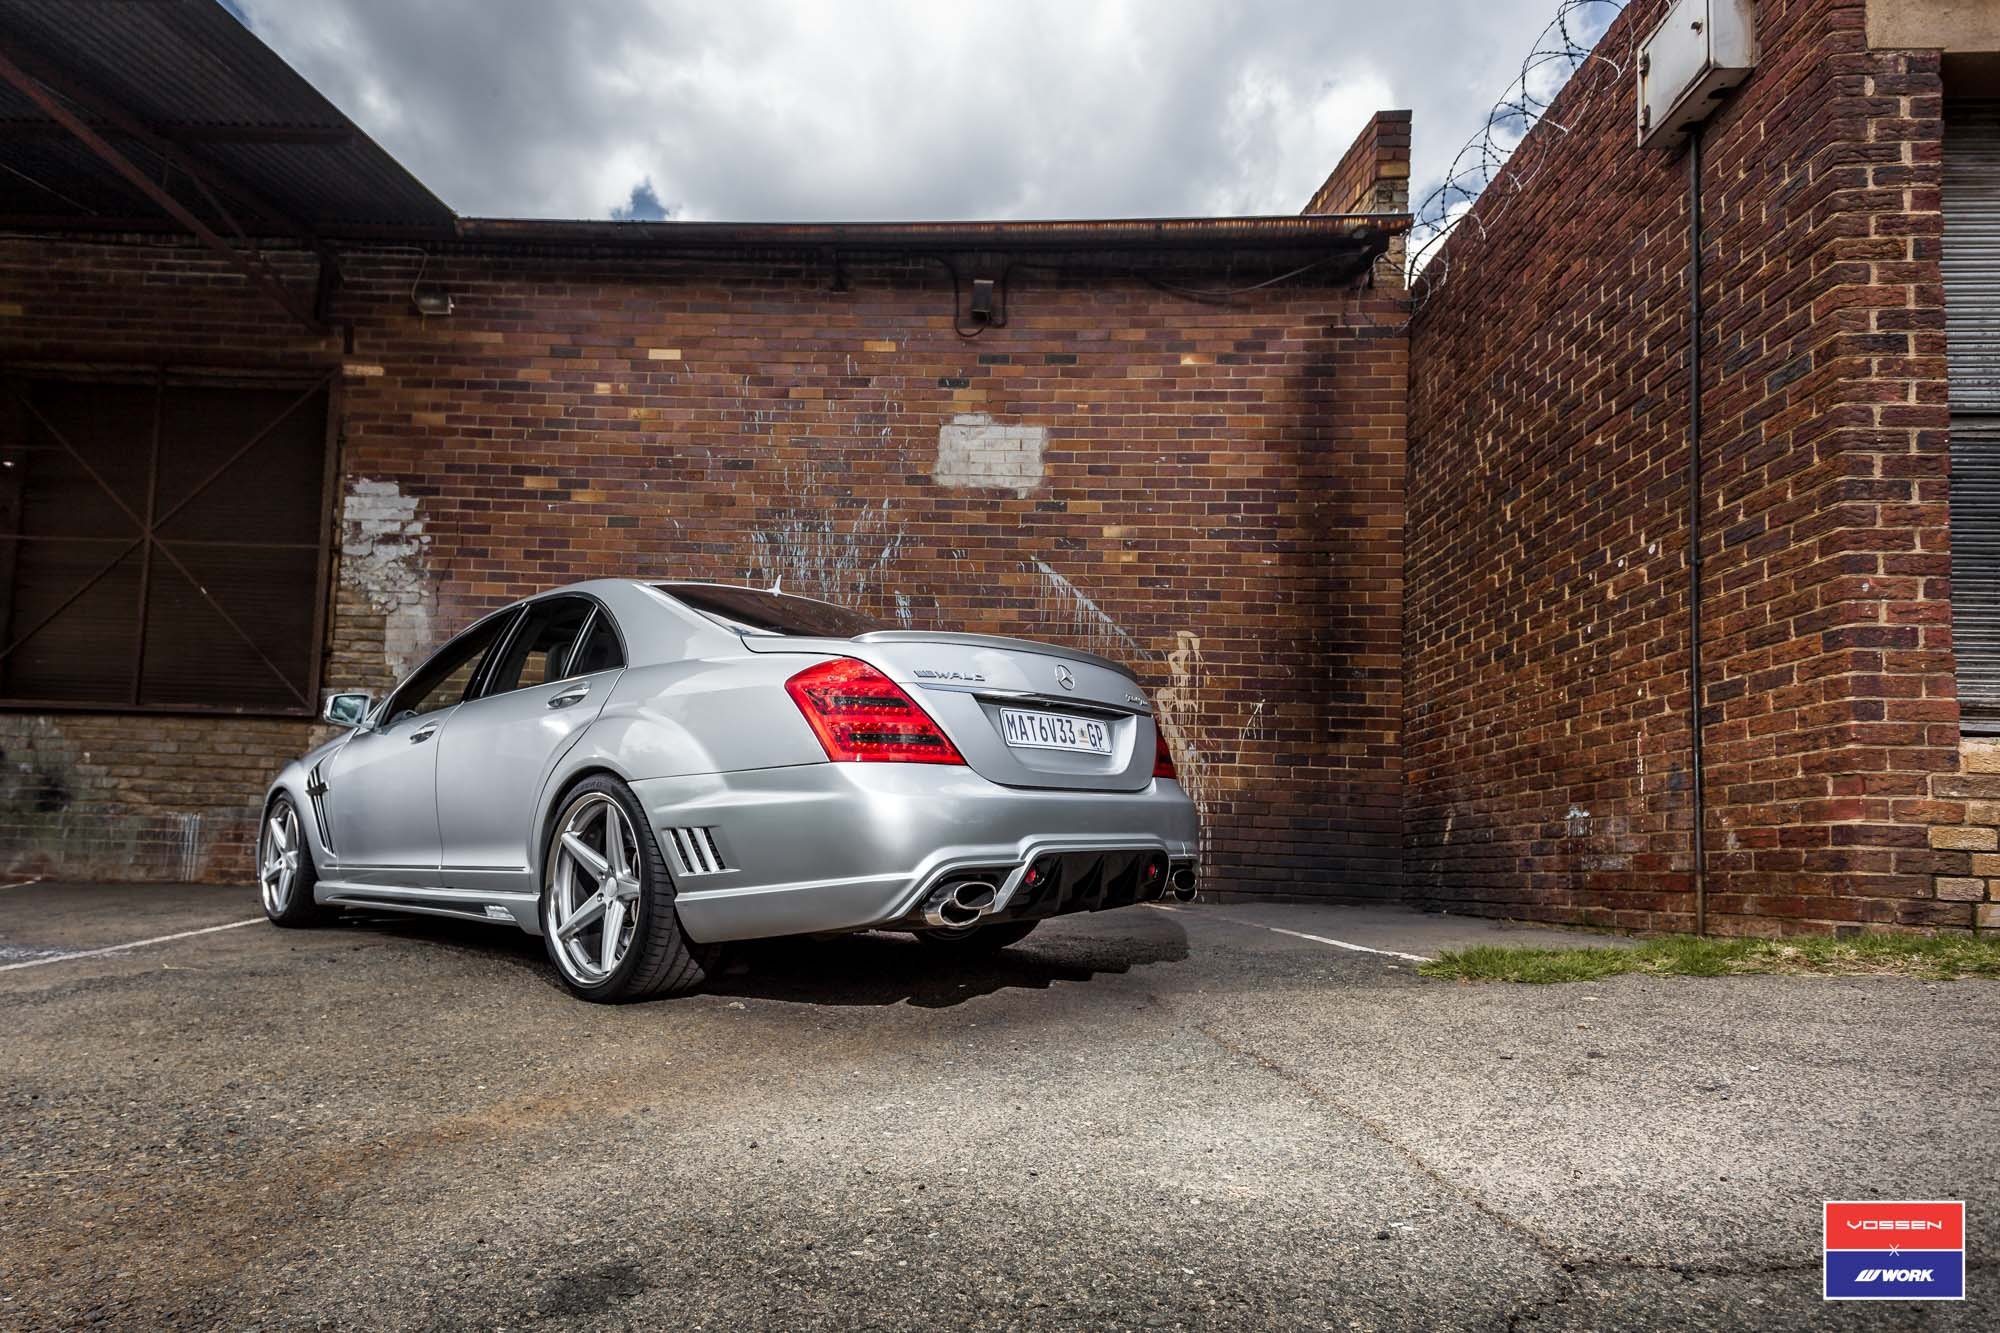 Aftermarket Rear Diffuser on Silver Mercedes S Class - Photo by Vossen